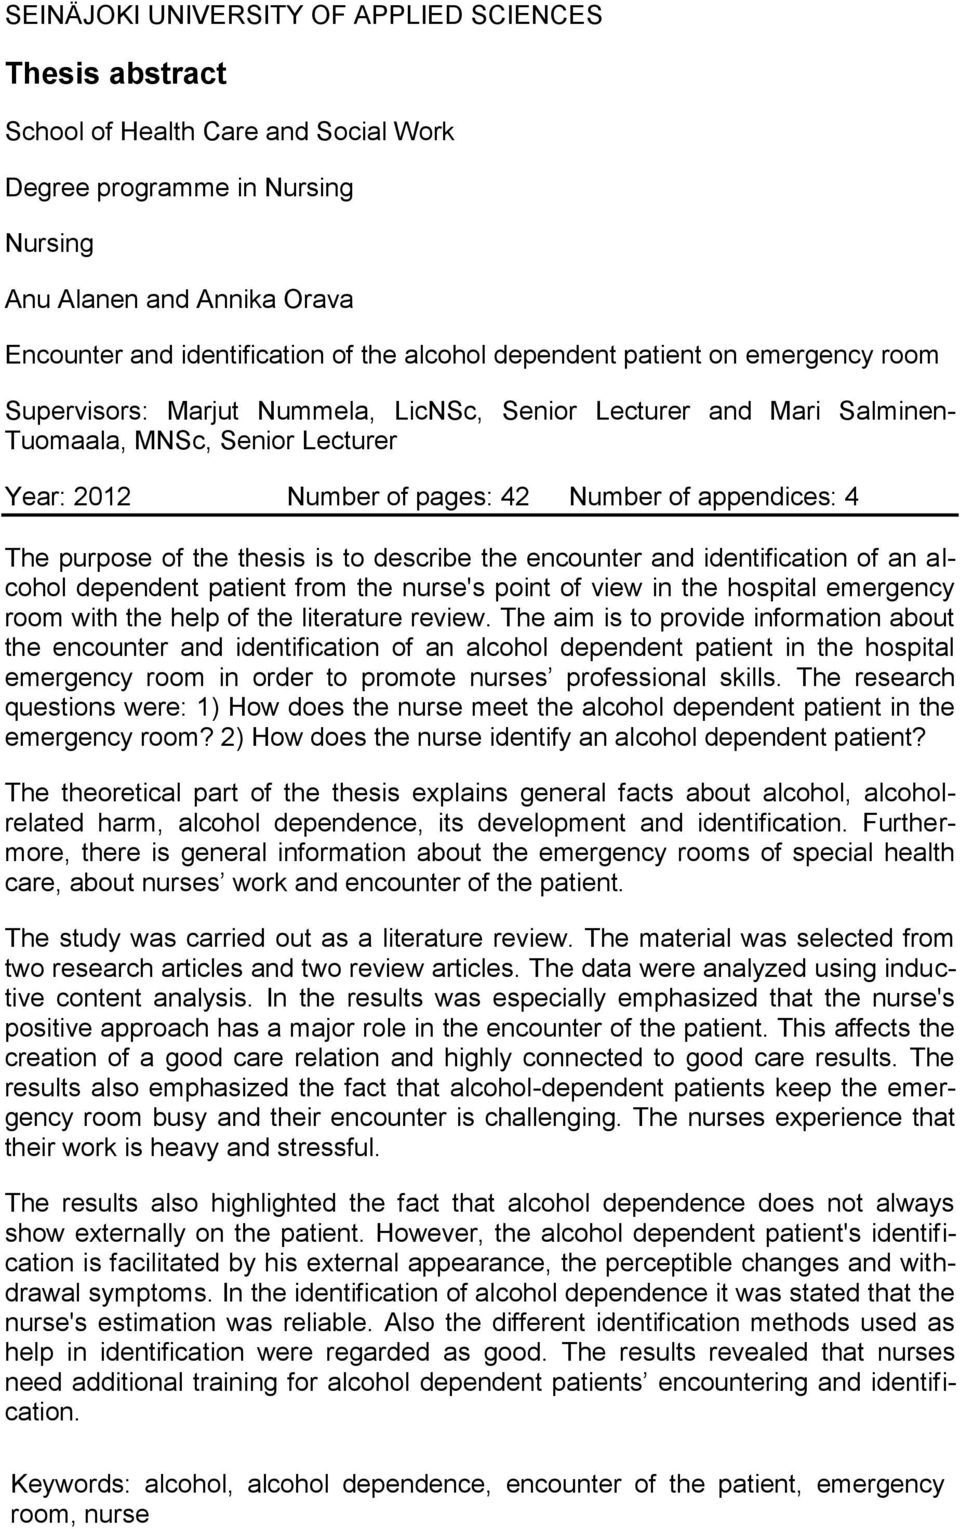 appendices: 4 The purpose of the thesis is to describe the encounter and identification of an alcohol dependent patient from the nurse's point of view in the hospital emergency room with the help of